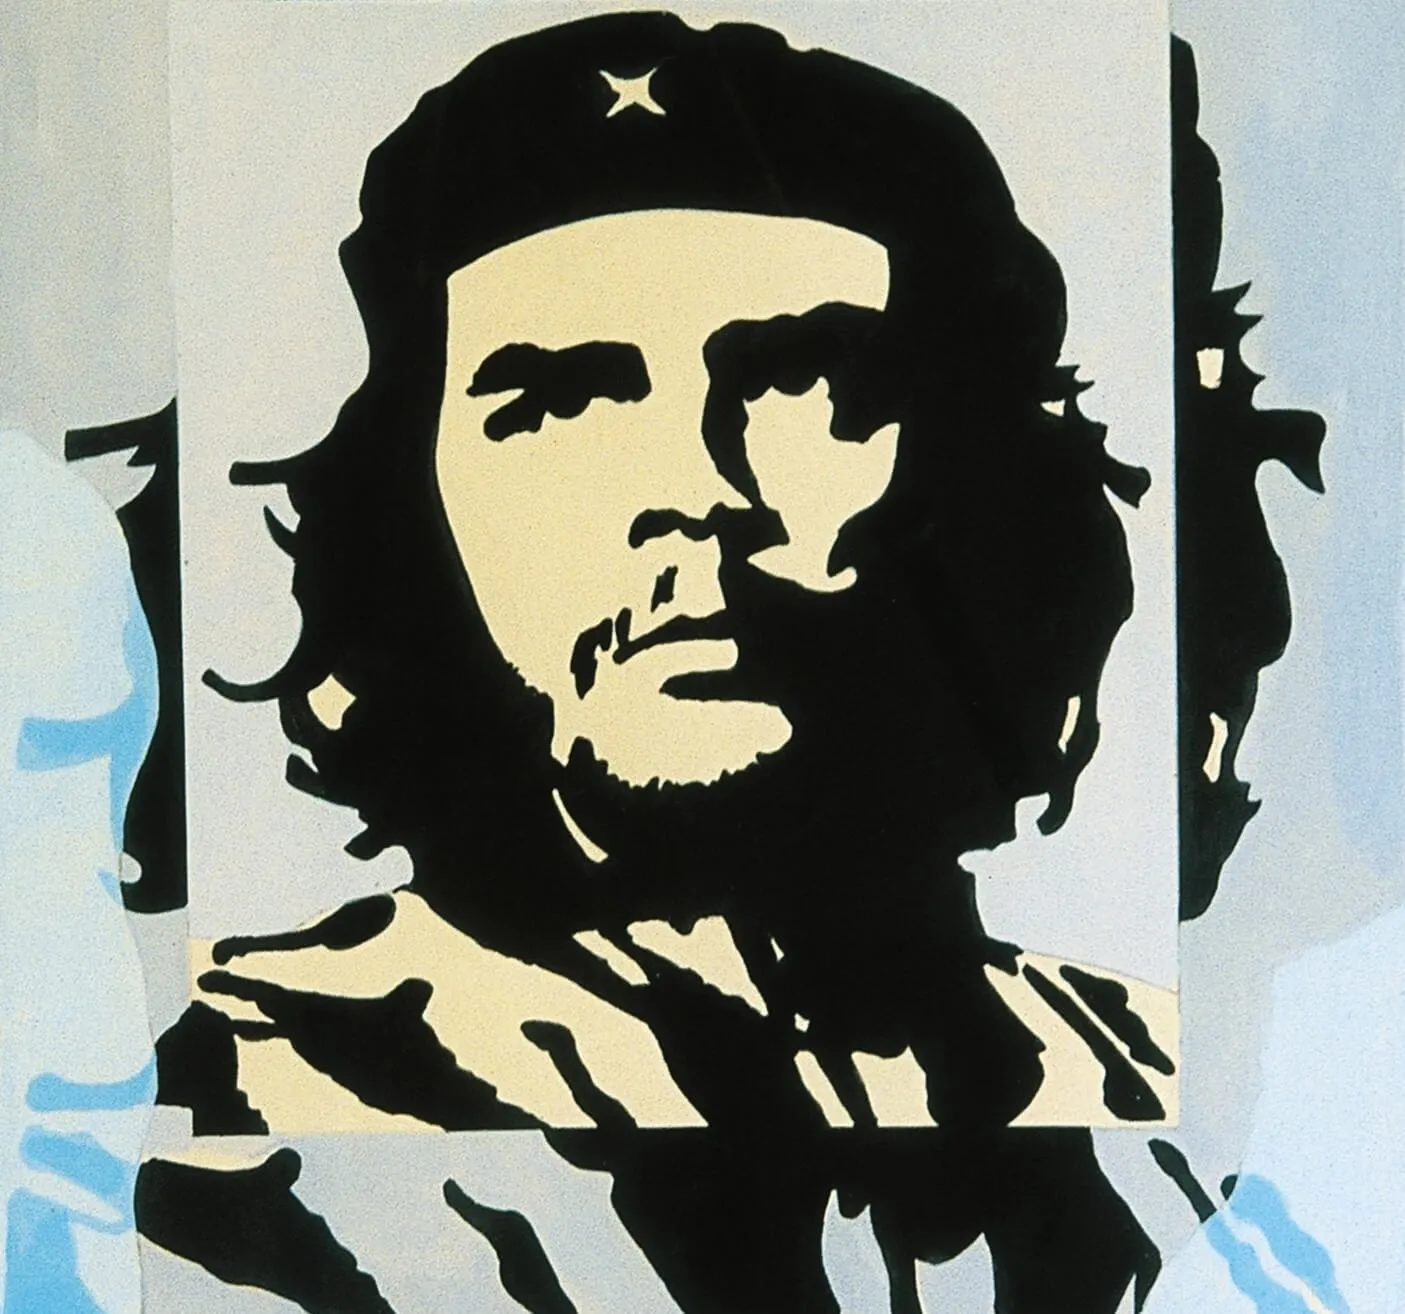 A painting of Che Guevara